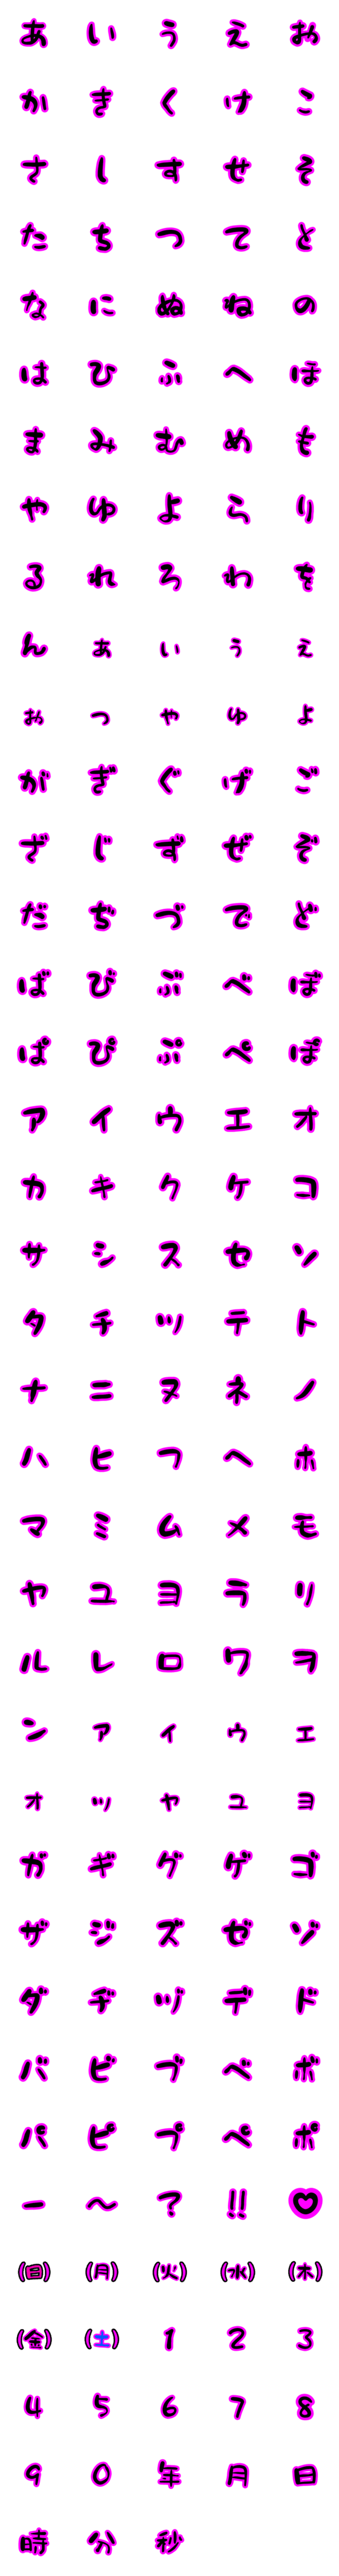 [LINE絵文字]♡ピンクで目立つ♪デコかなカナ数字の画像一覧